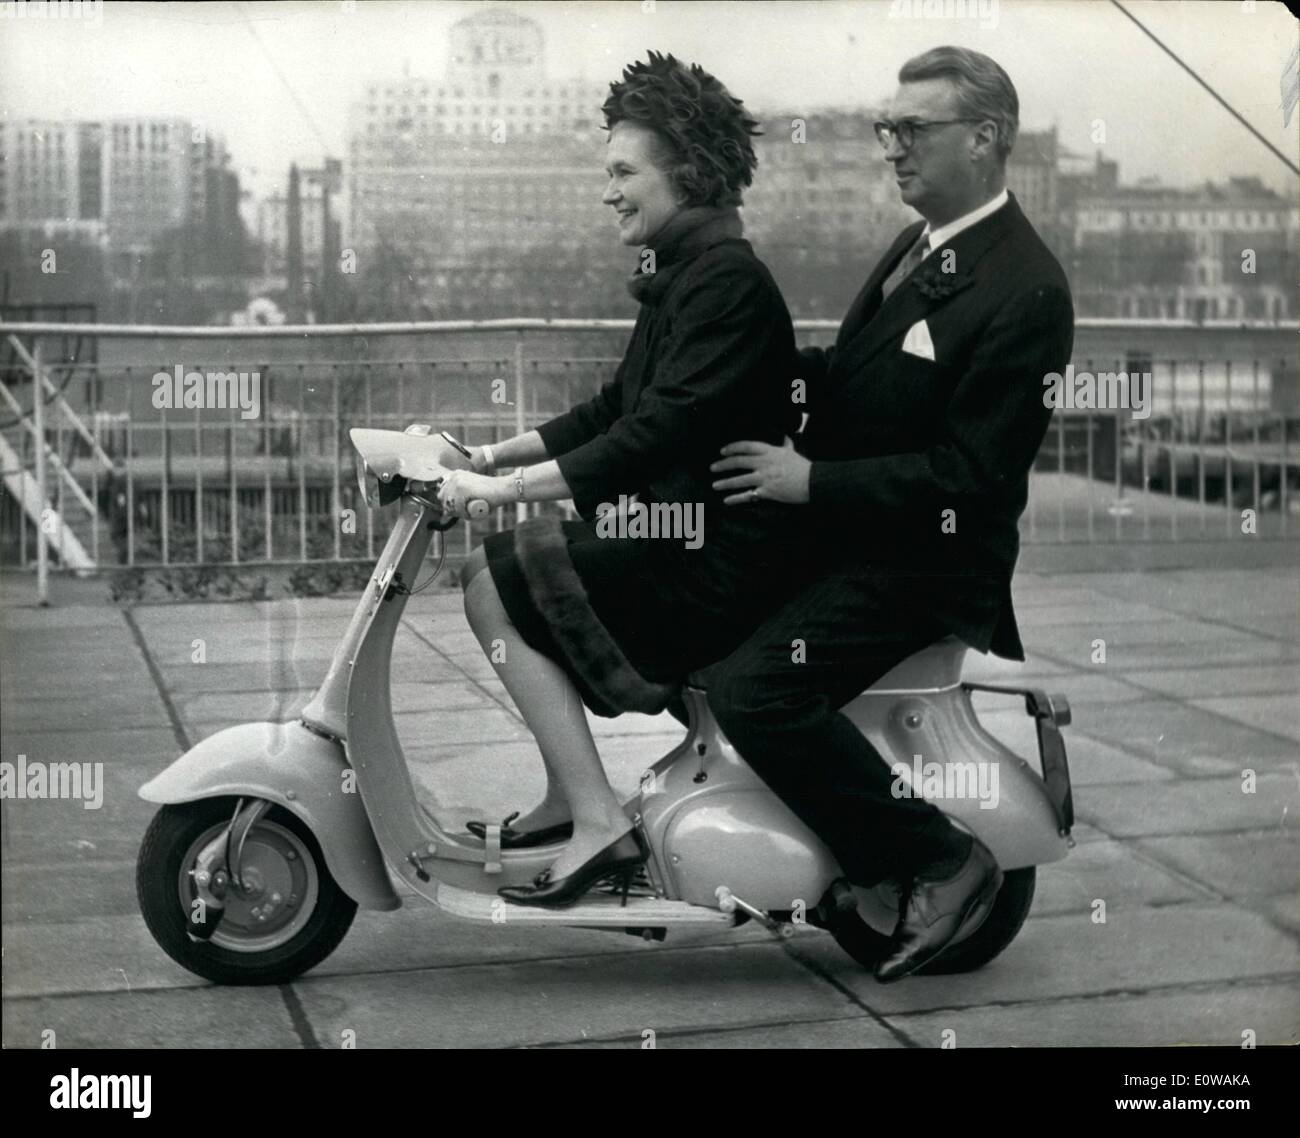 Mar. 28, 1962 - 28-3-62 Lord and Lady Mancroft go for a spin on Tina , world's cheapest, fully automatic scooter. With Lady Mancroft at the controls, Lord Mancroft went for a spin on the world's first fully automatic scooter, to sell at under &pound;100 during a demonstration at Festival Hall yesterday of the new Triumph Tina . It is claimed to be the world's cheapest fully automatic scooter. Basic price is &pound;93. 9s. It is in light blue, has a 100 c.c. engine giving 4 &frac12; h.p. at 5,000 r.p.m. The transmission is automatic with no clutch or gear lever, does 100 m.p.g. at 40 m.p.h Stock Photo